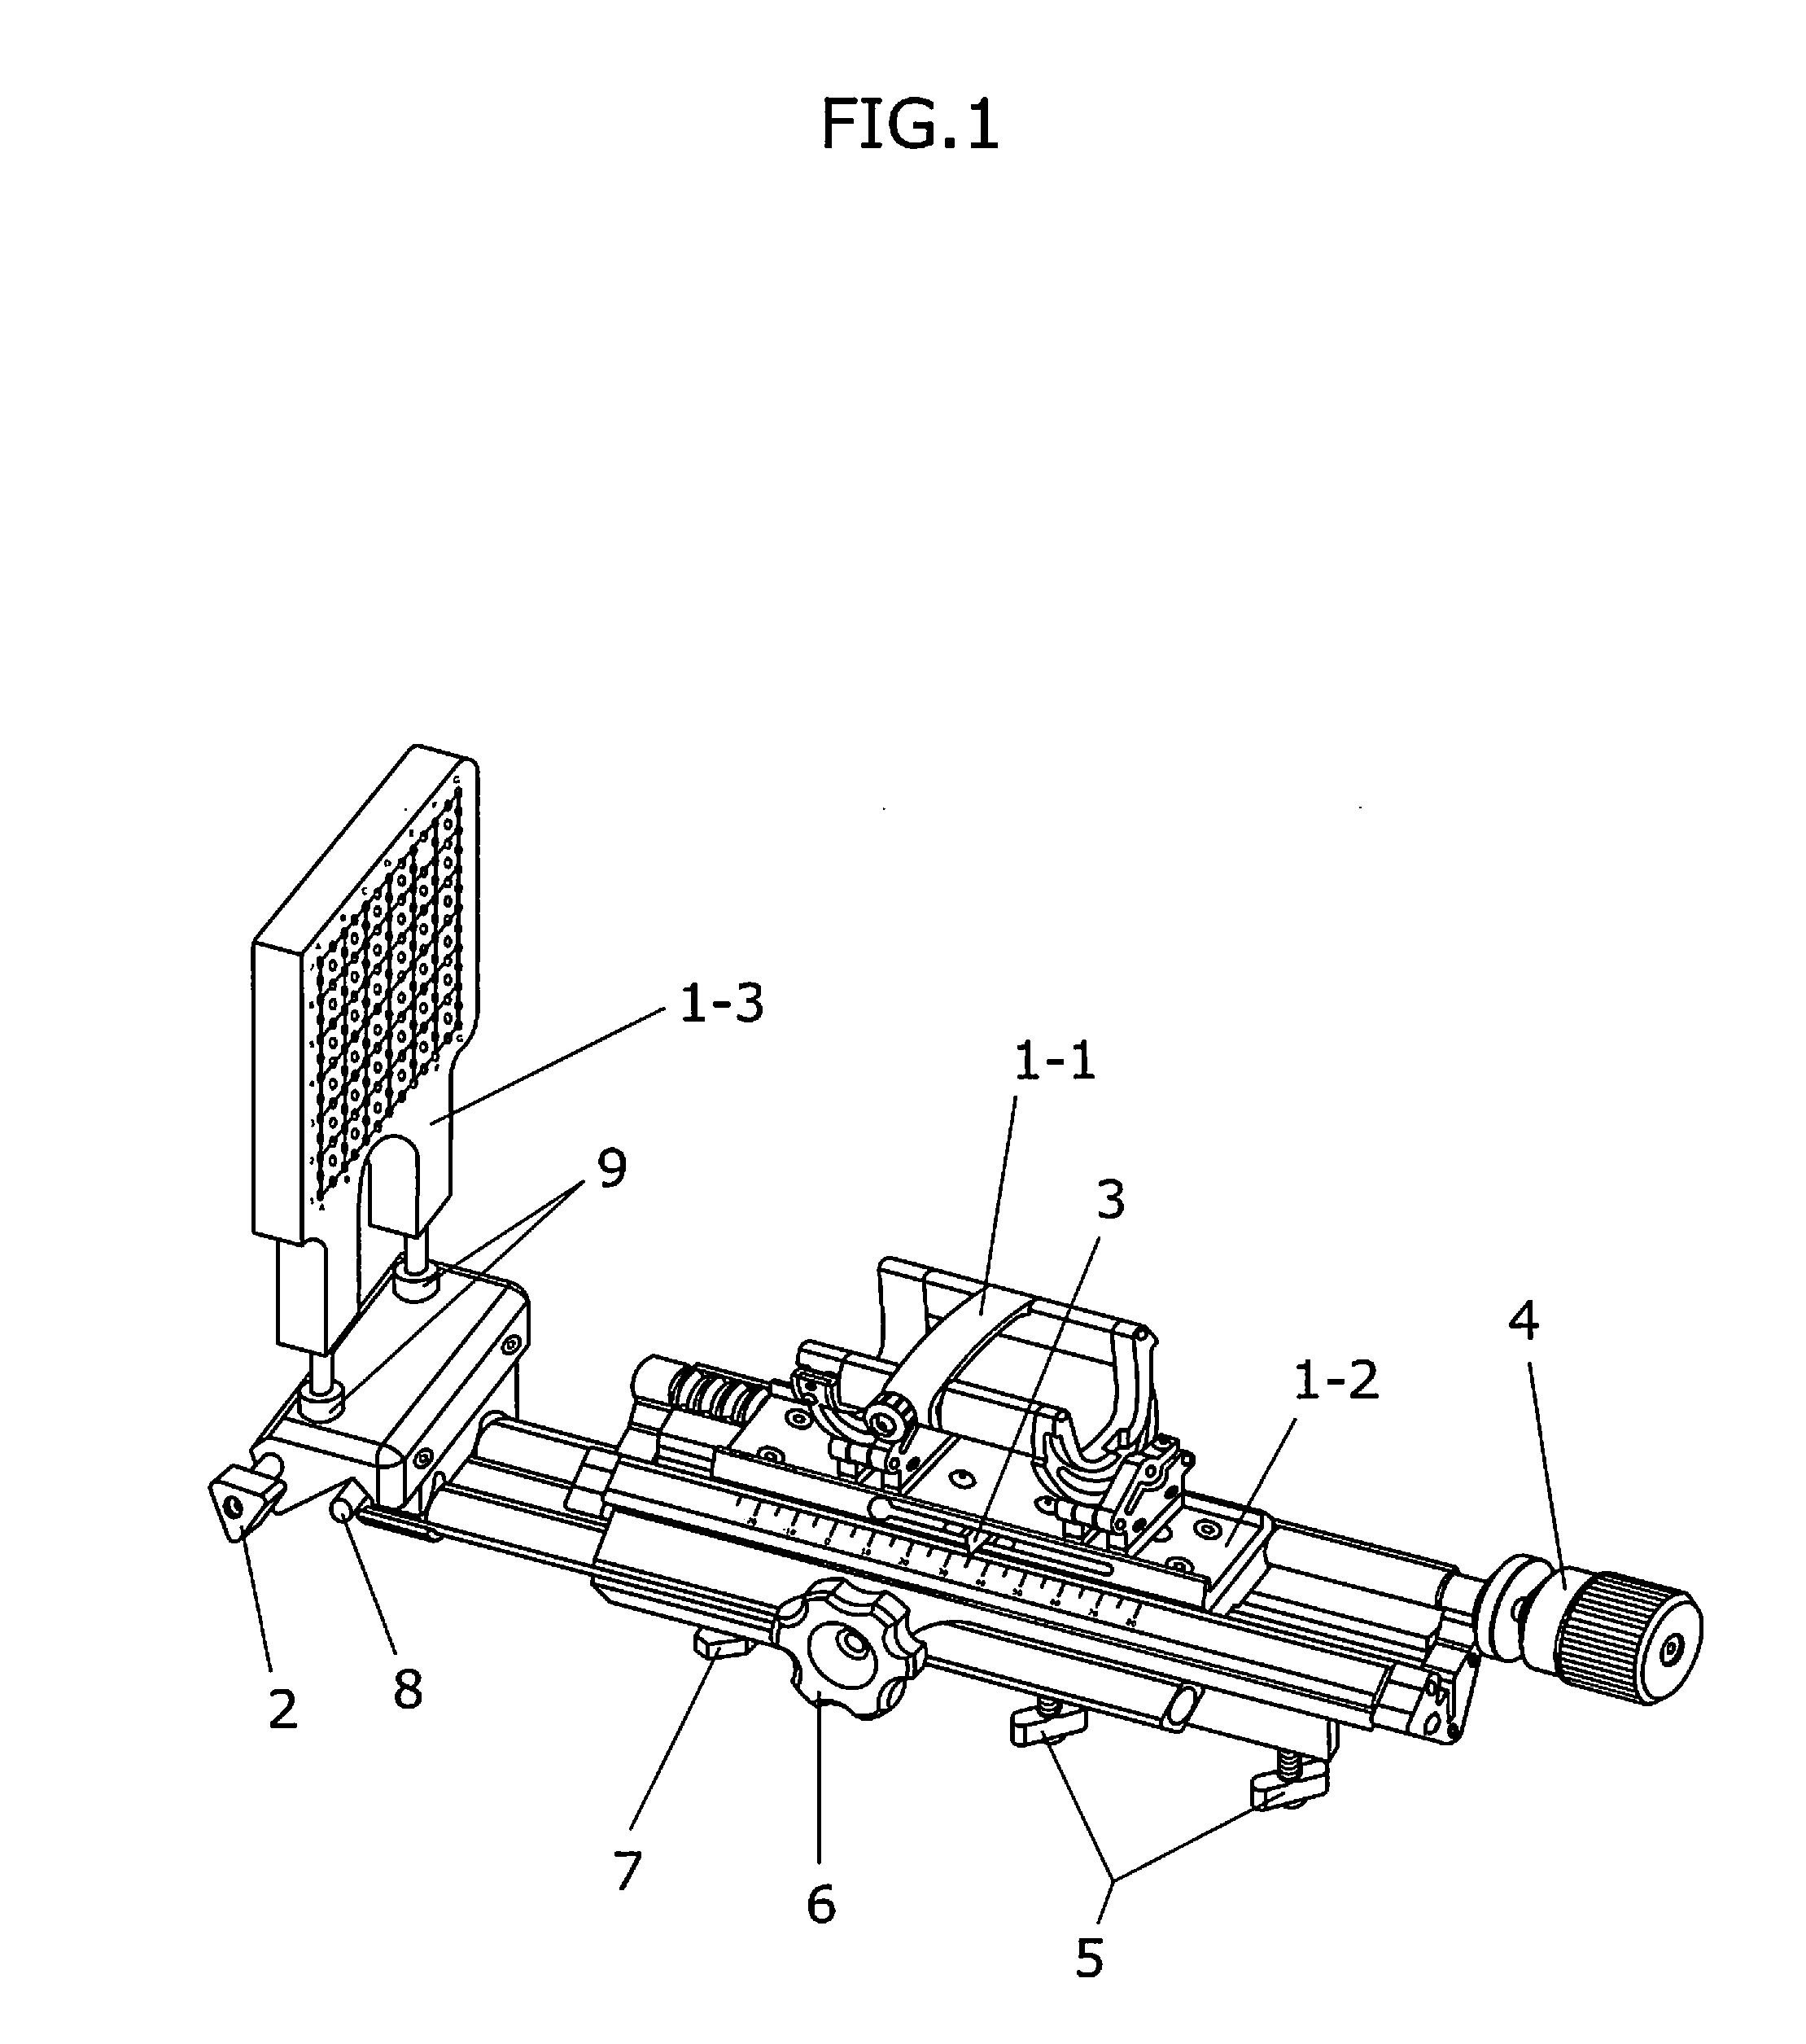 Cradle apparatus for a stepper to hold ultra-sound probe